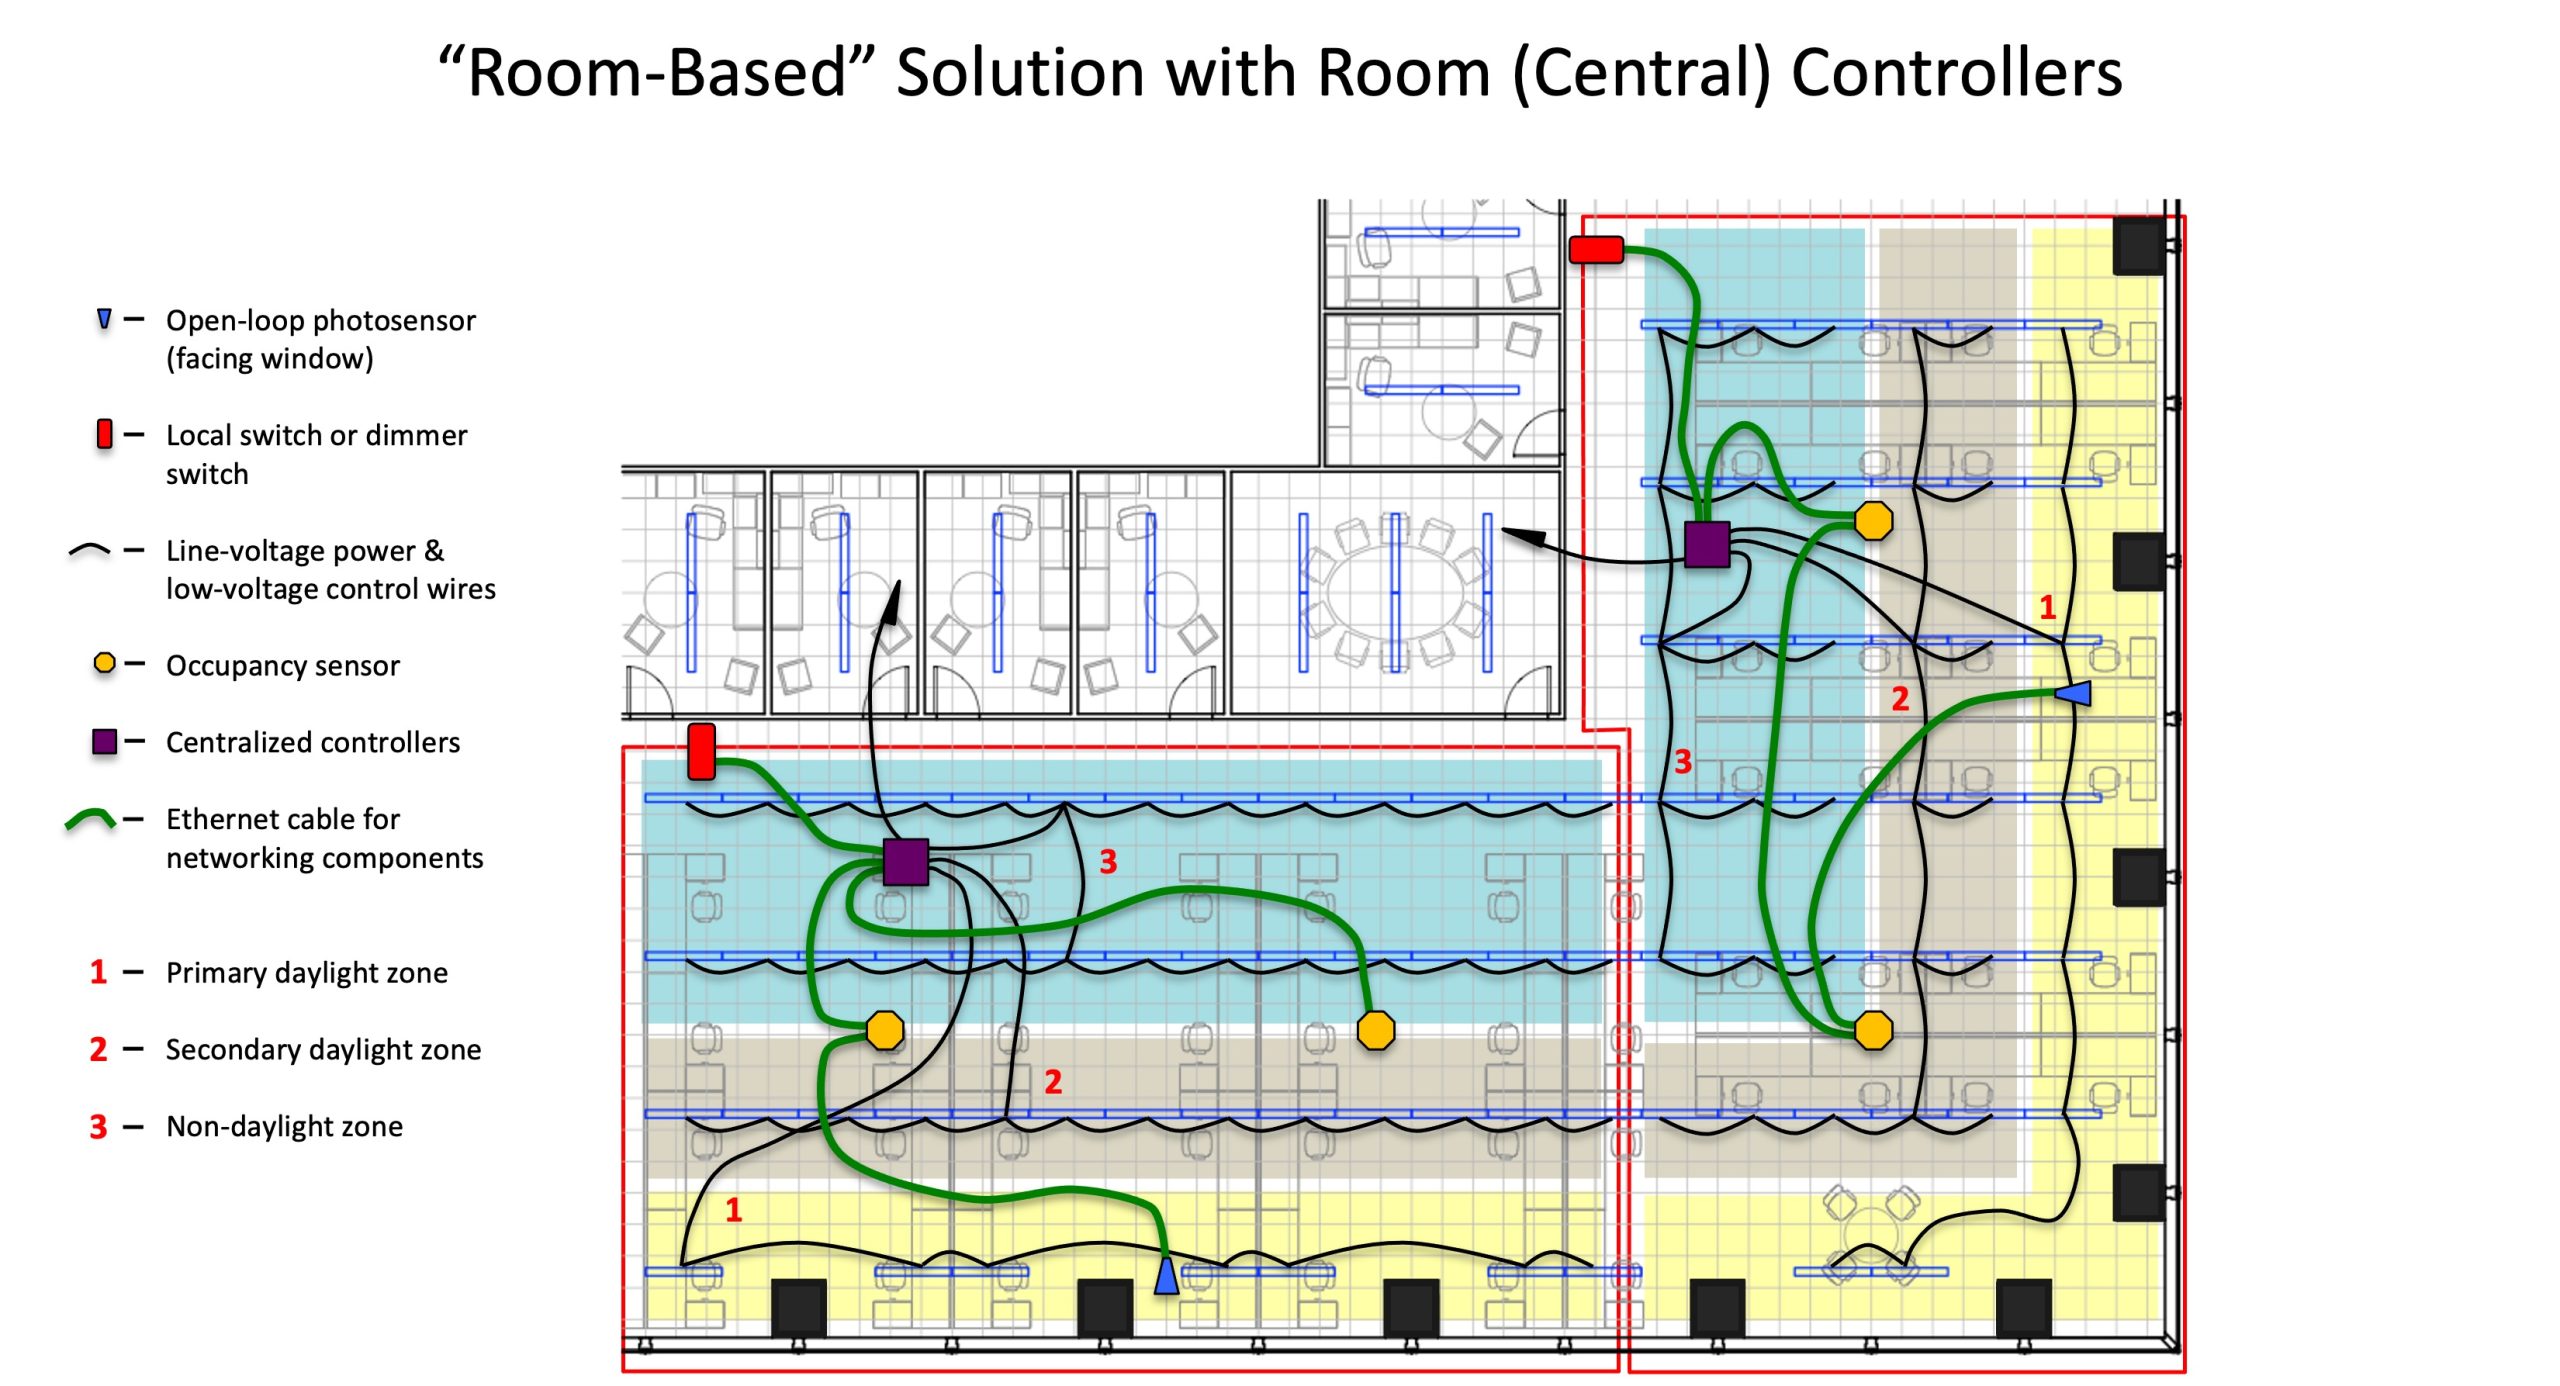 “Room-Based” Solution with Room (Central) Controllers